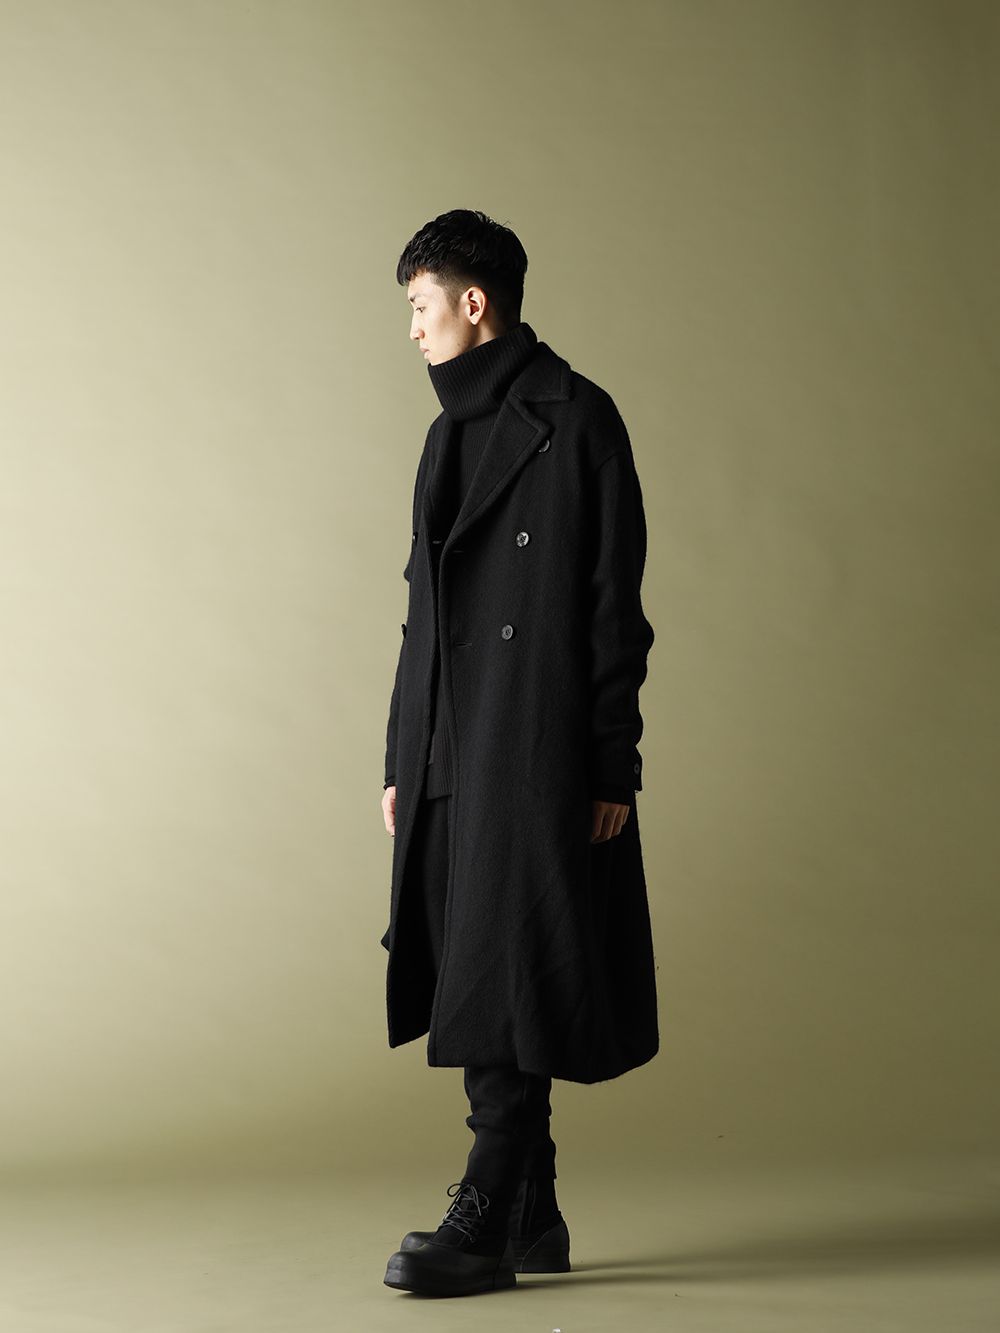 LOGY Kyoto JULIUS 20-21AW DOUBLE BREASTED COAT STYLE!! - FASCINATE